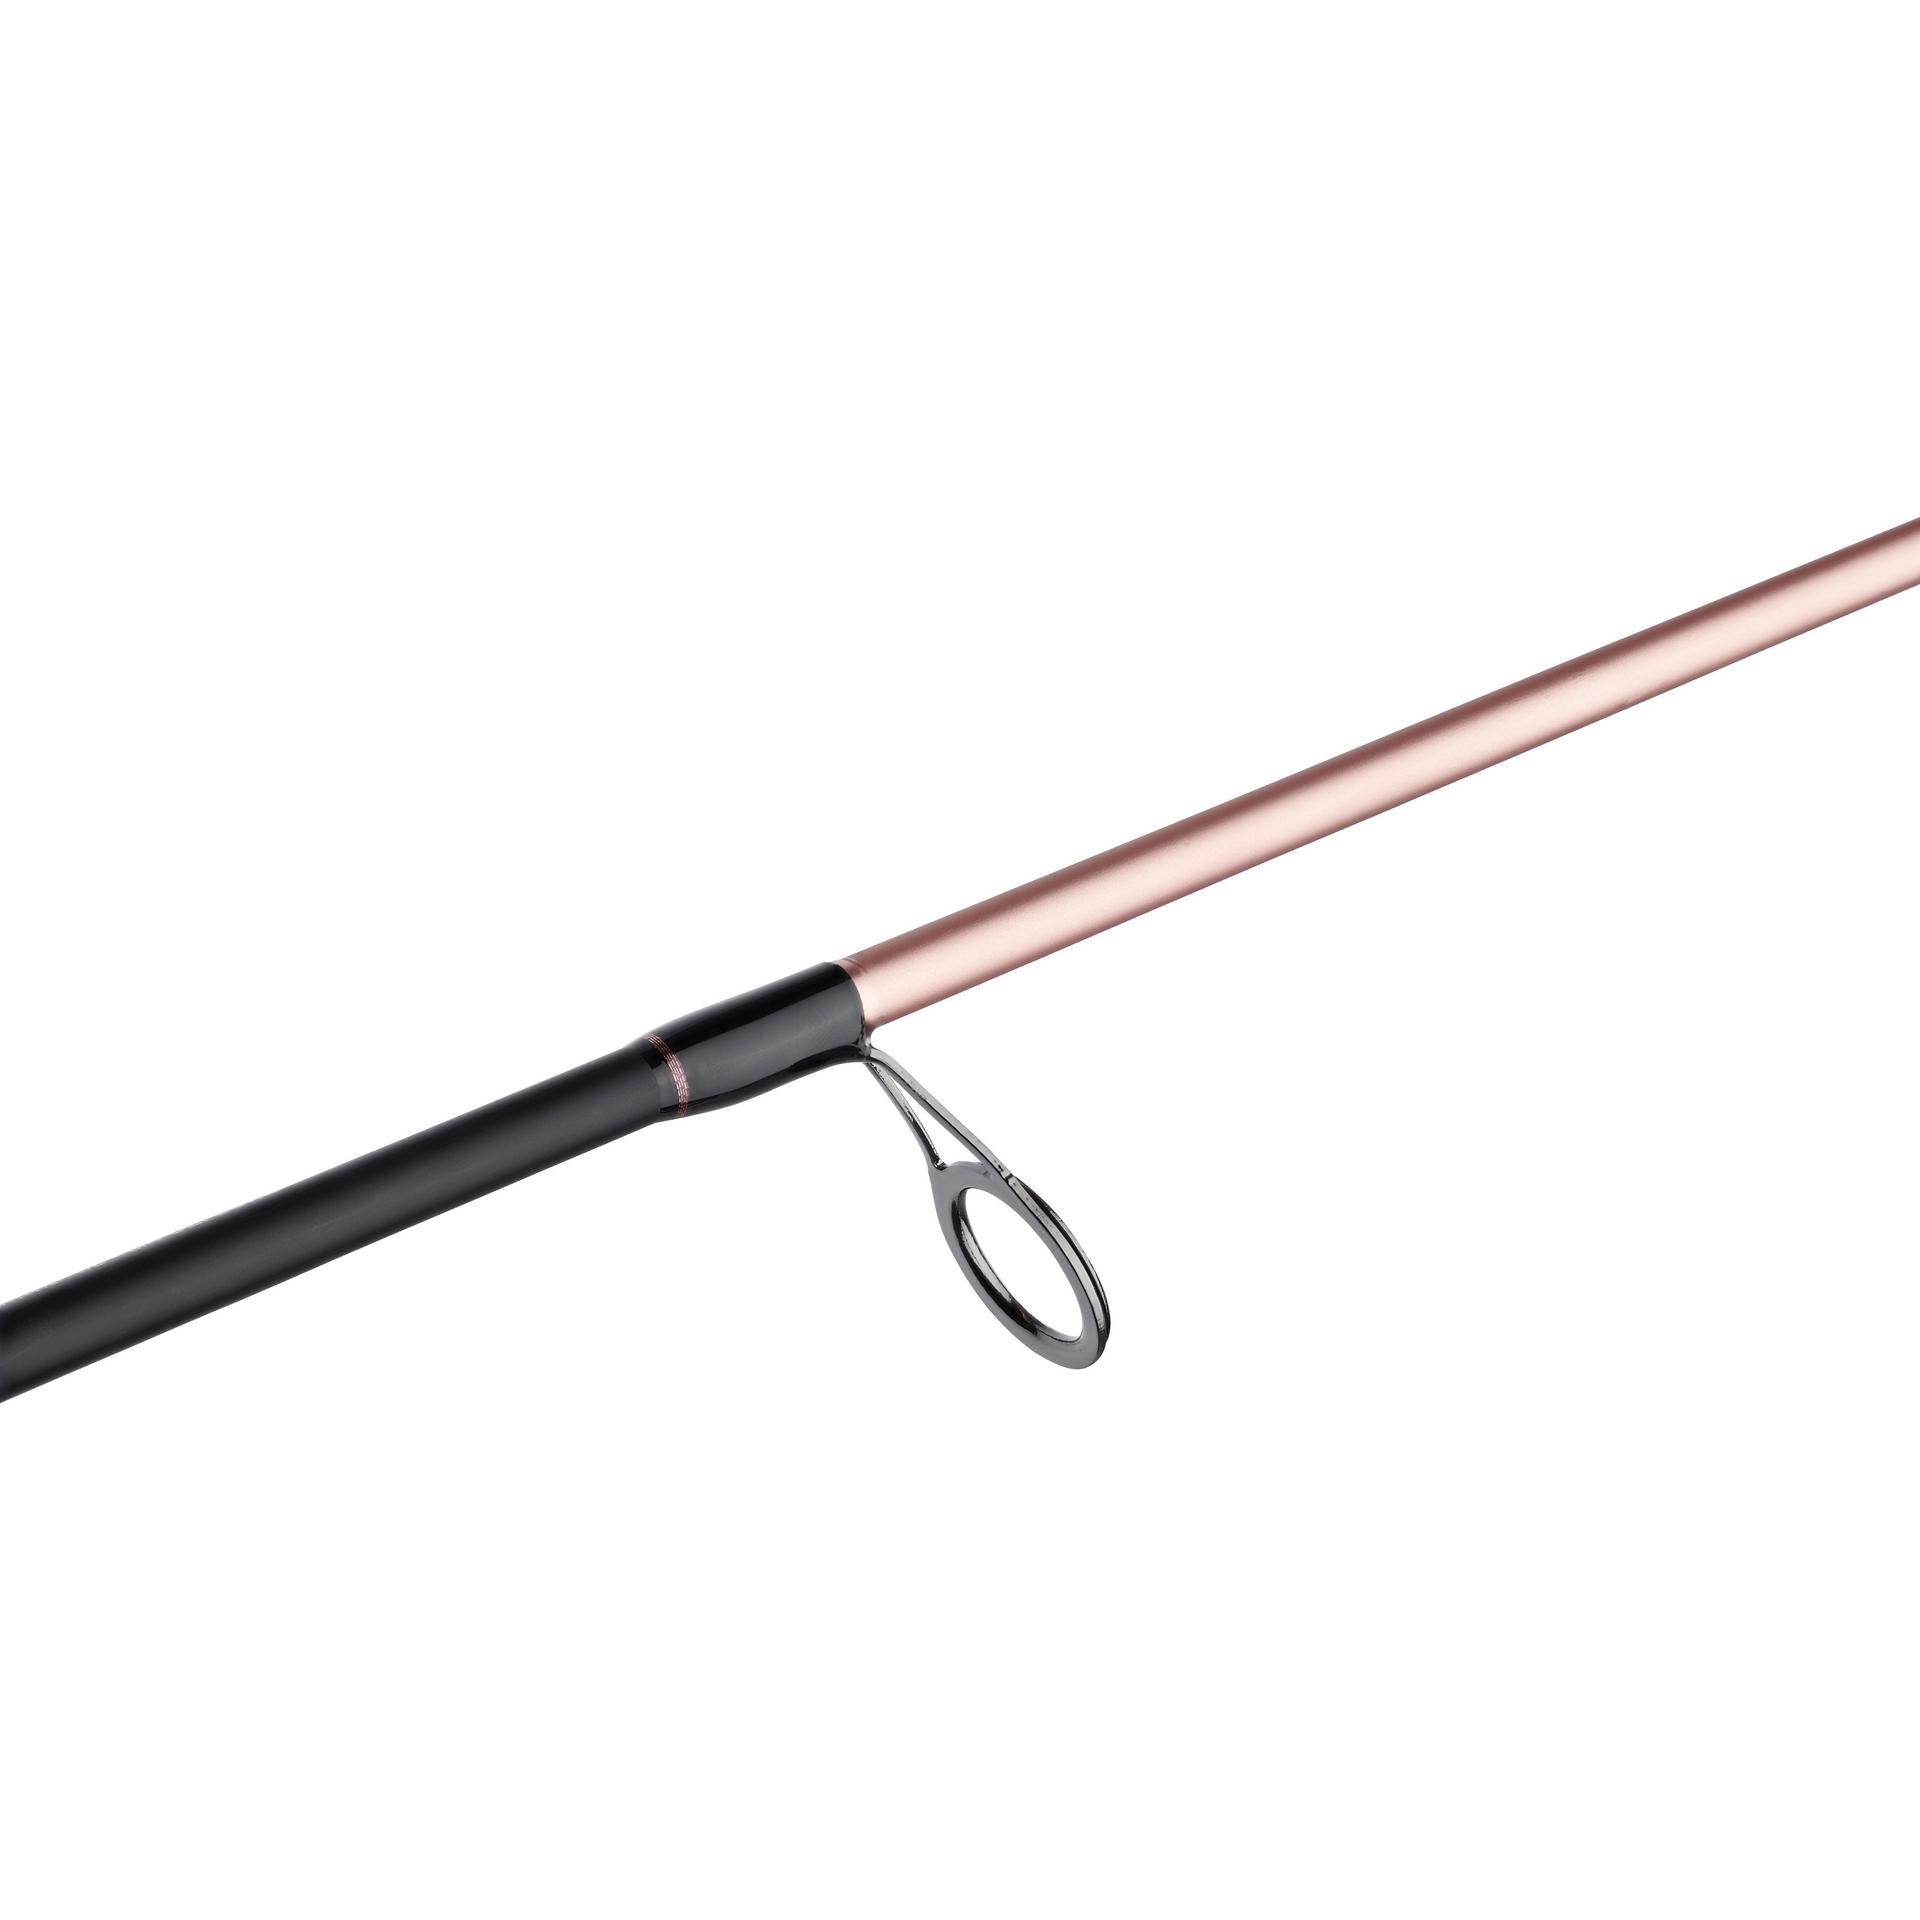 Penn Fishing Rod & Reel Combos for sale, Shop with Afterpay